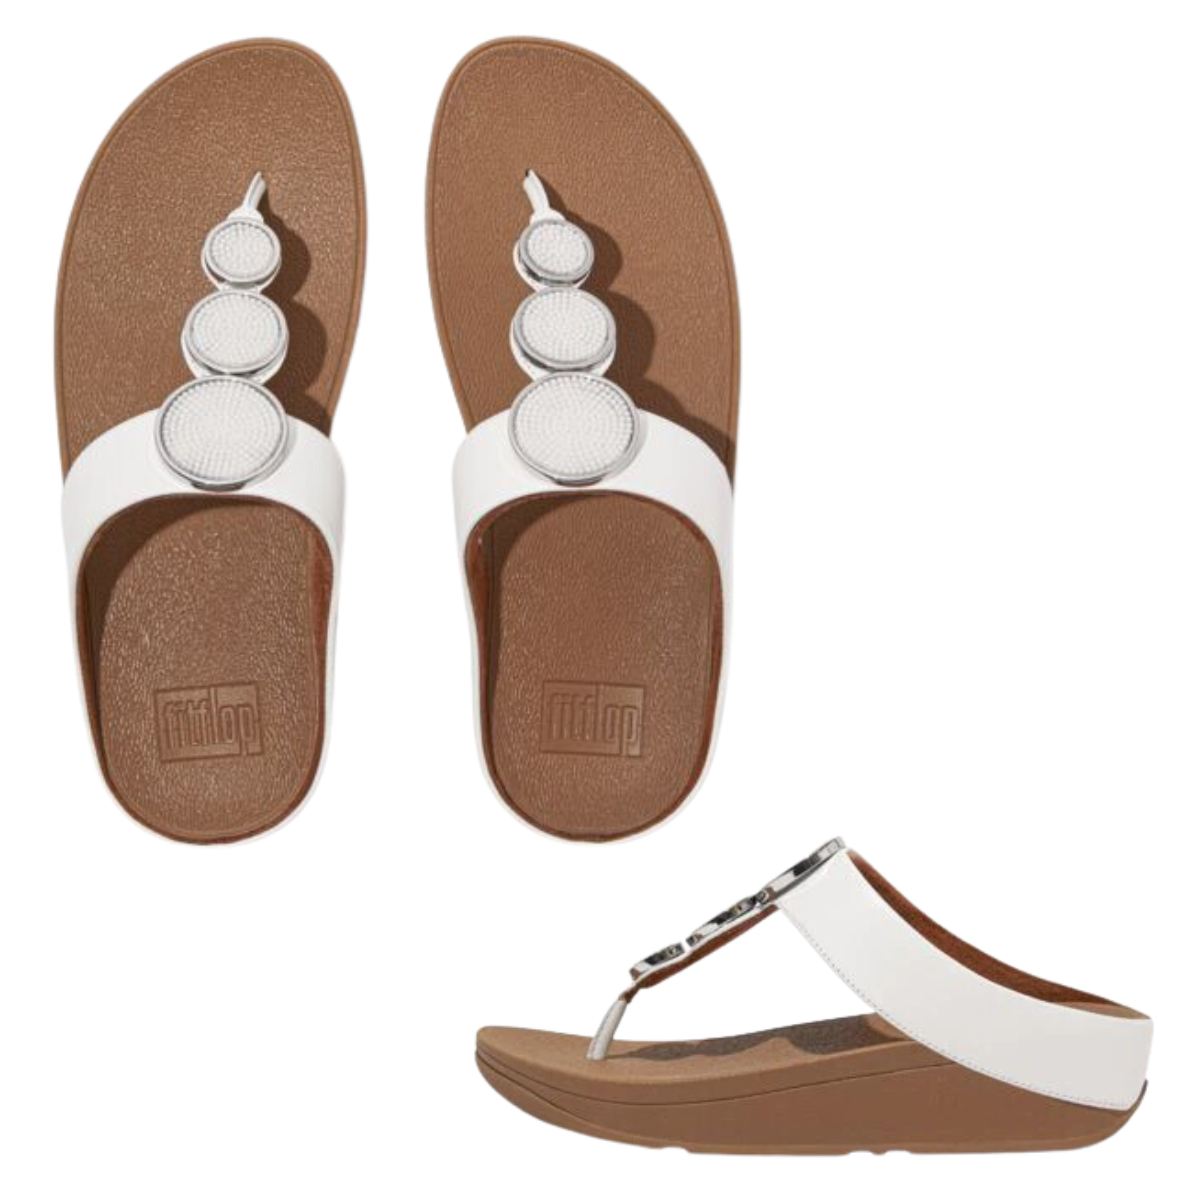 A pair of white Halo Bead Circle by Fit Flops flip flops with a white leather strap by FITFLOP USA LLC.